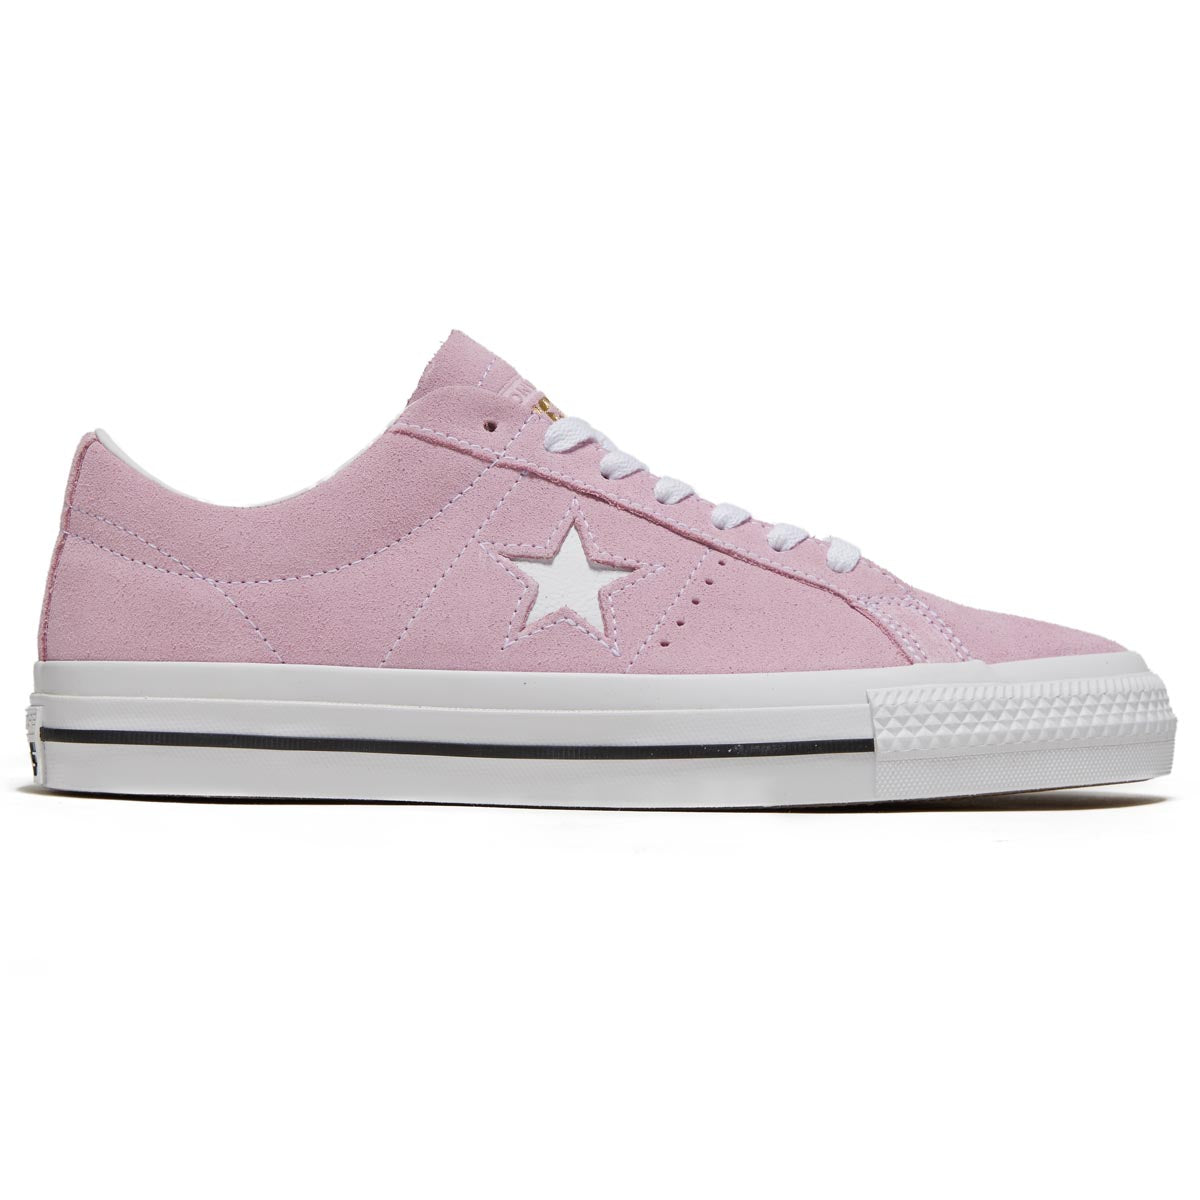 Converse One Star Pro Shoes - Stardust Lilac/White/Black image 1